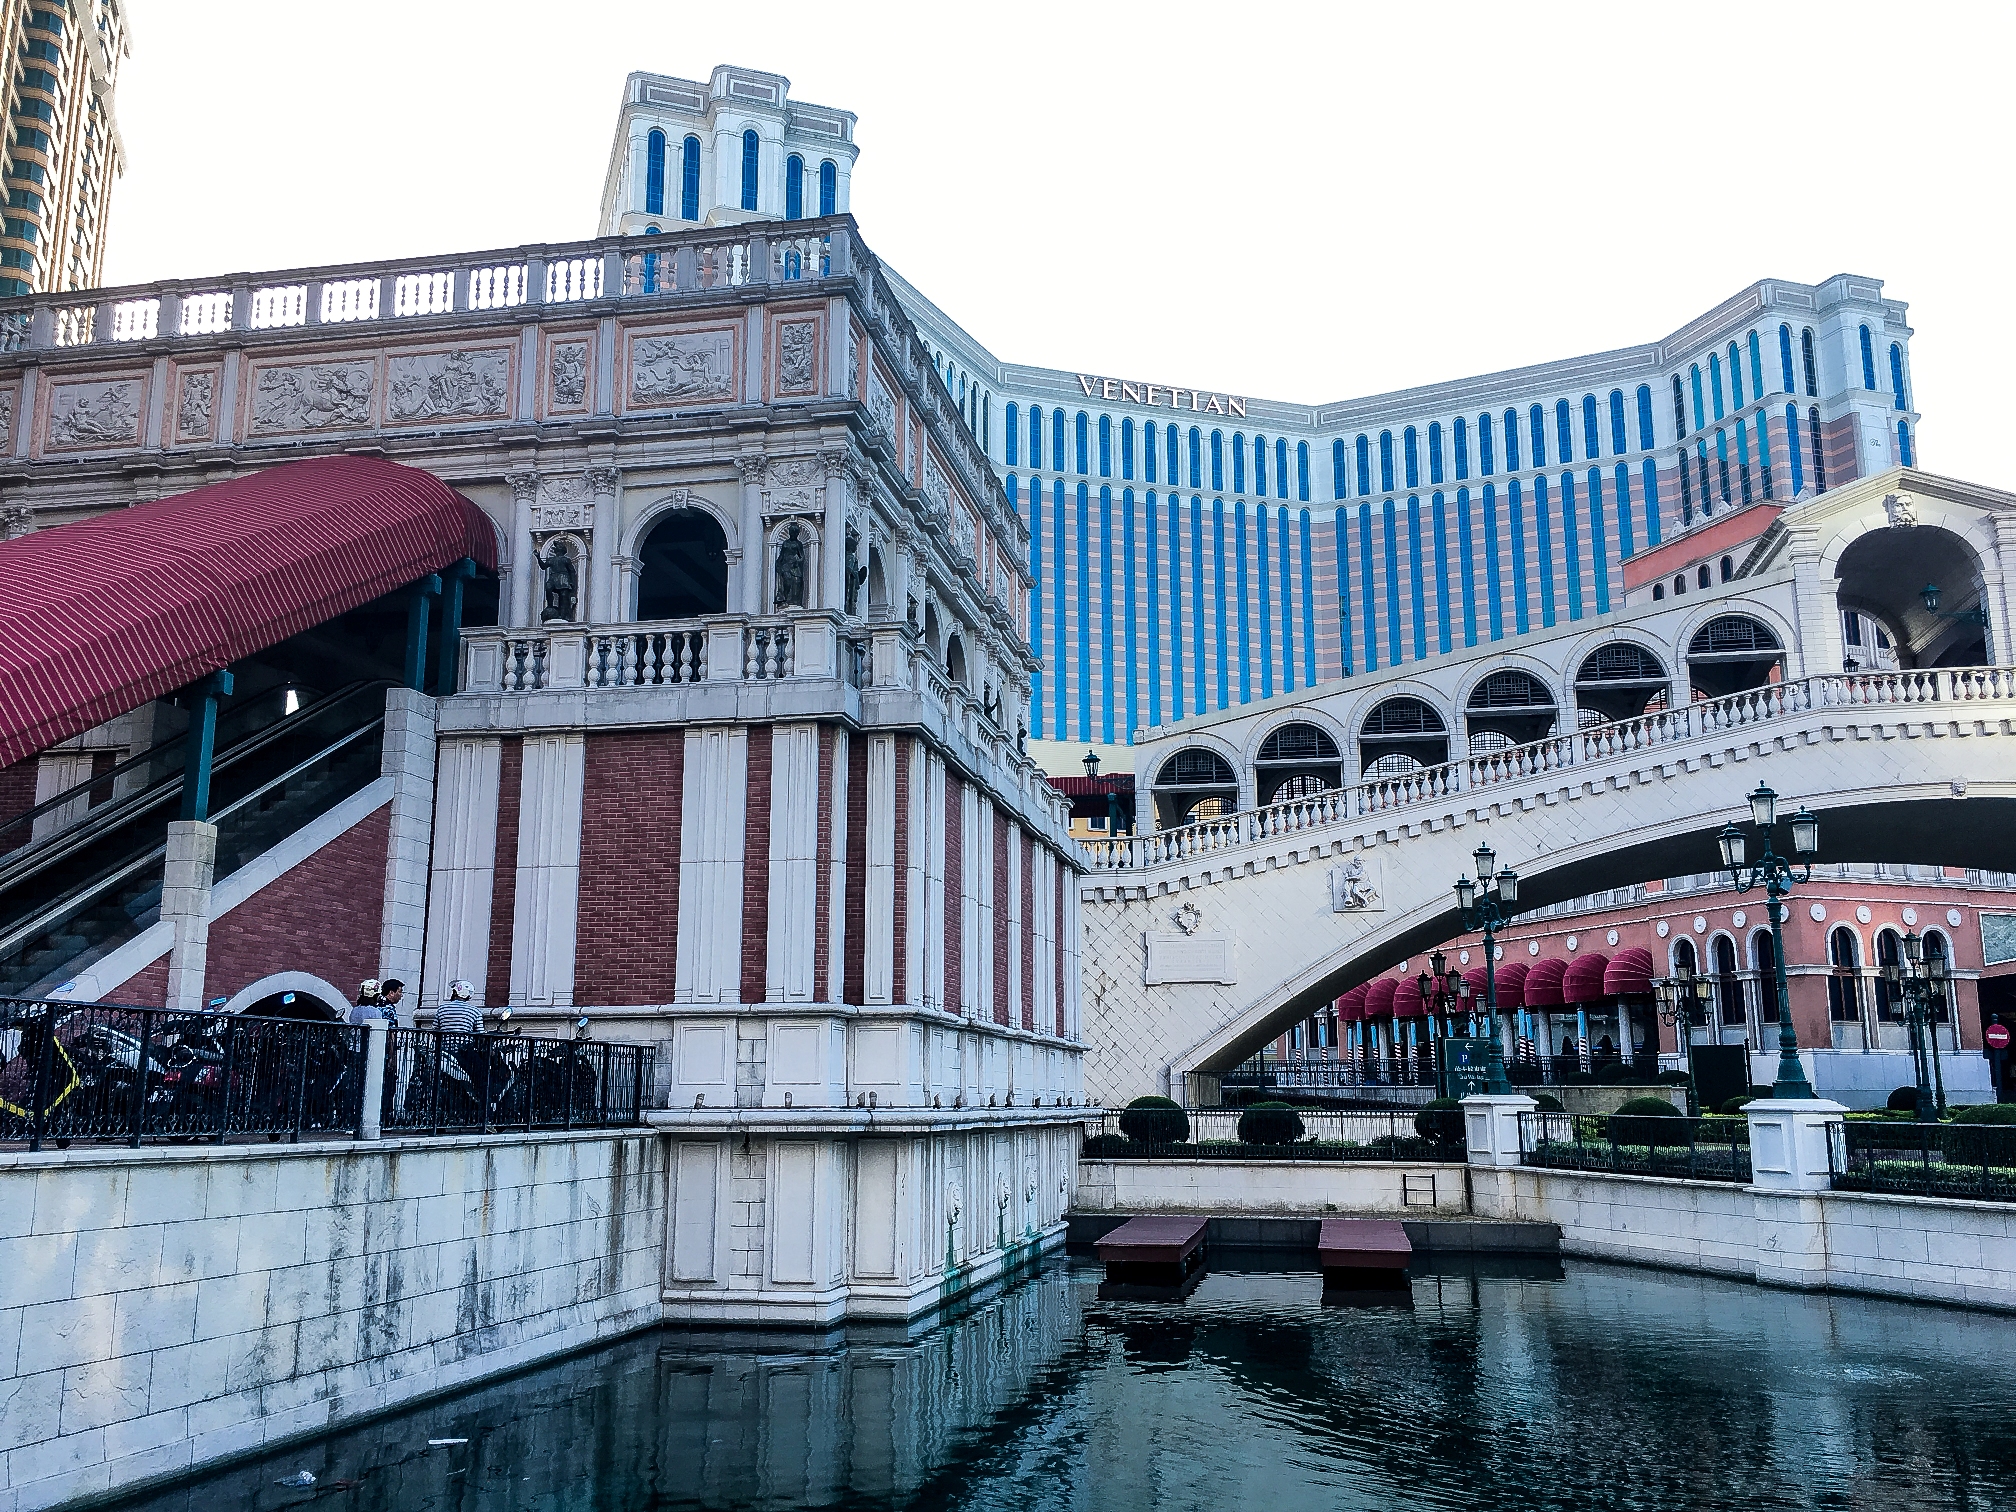 View of the Venetian Macao